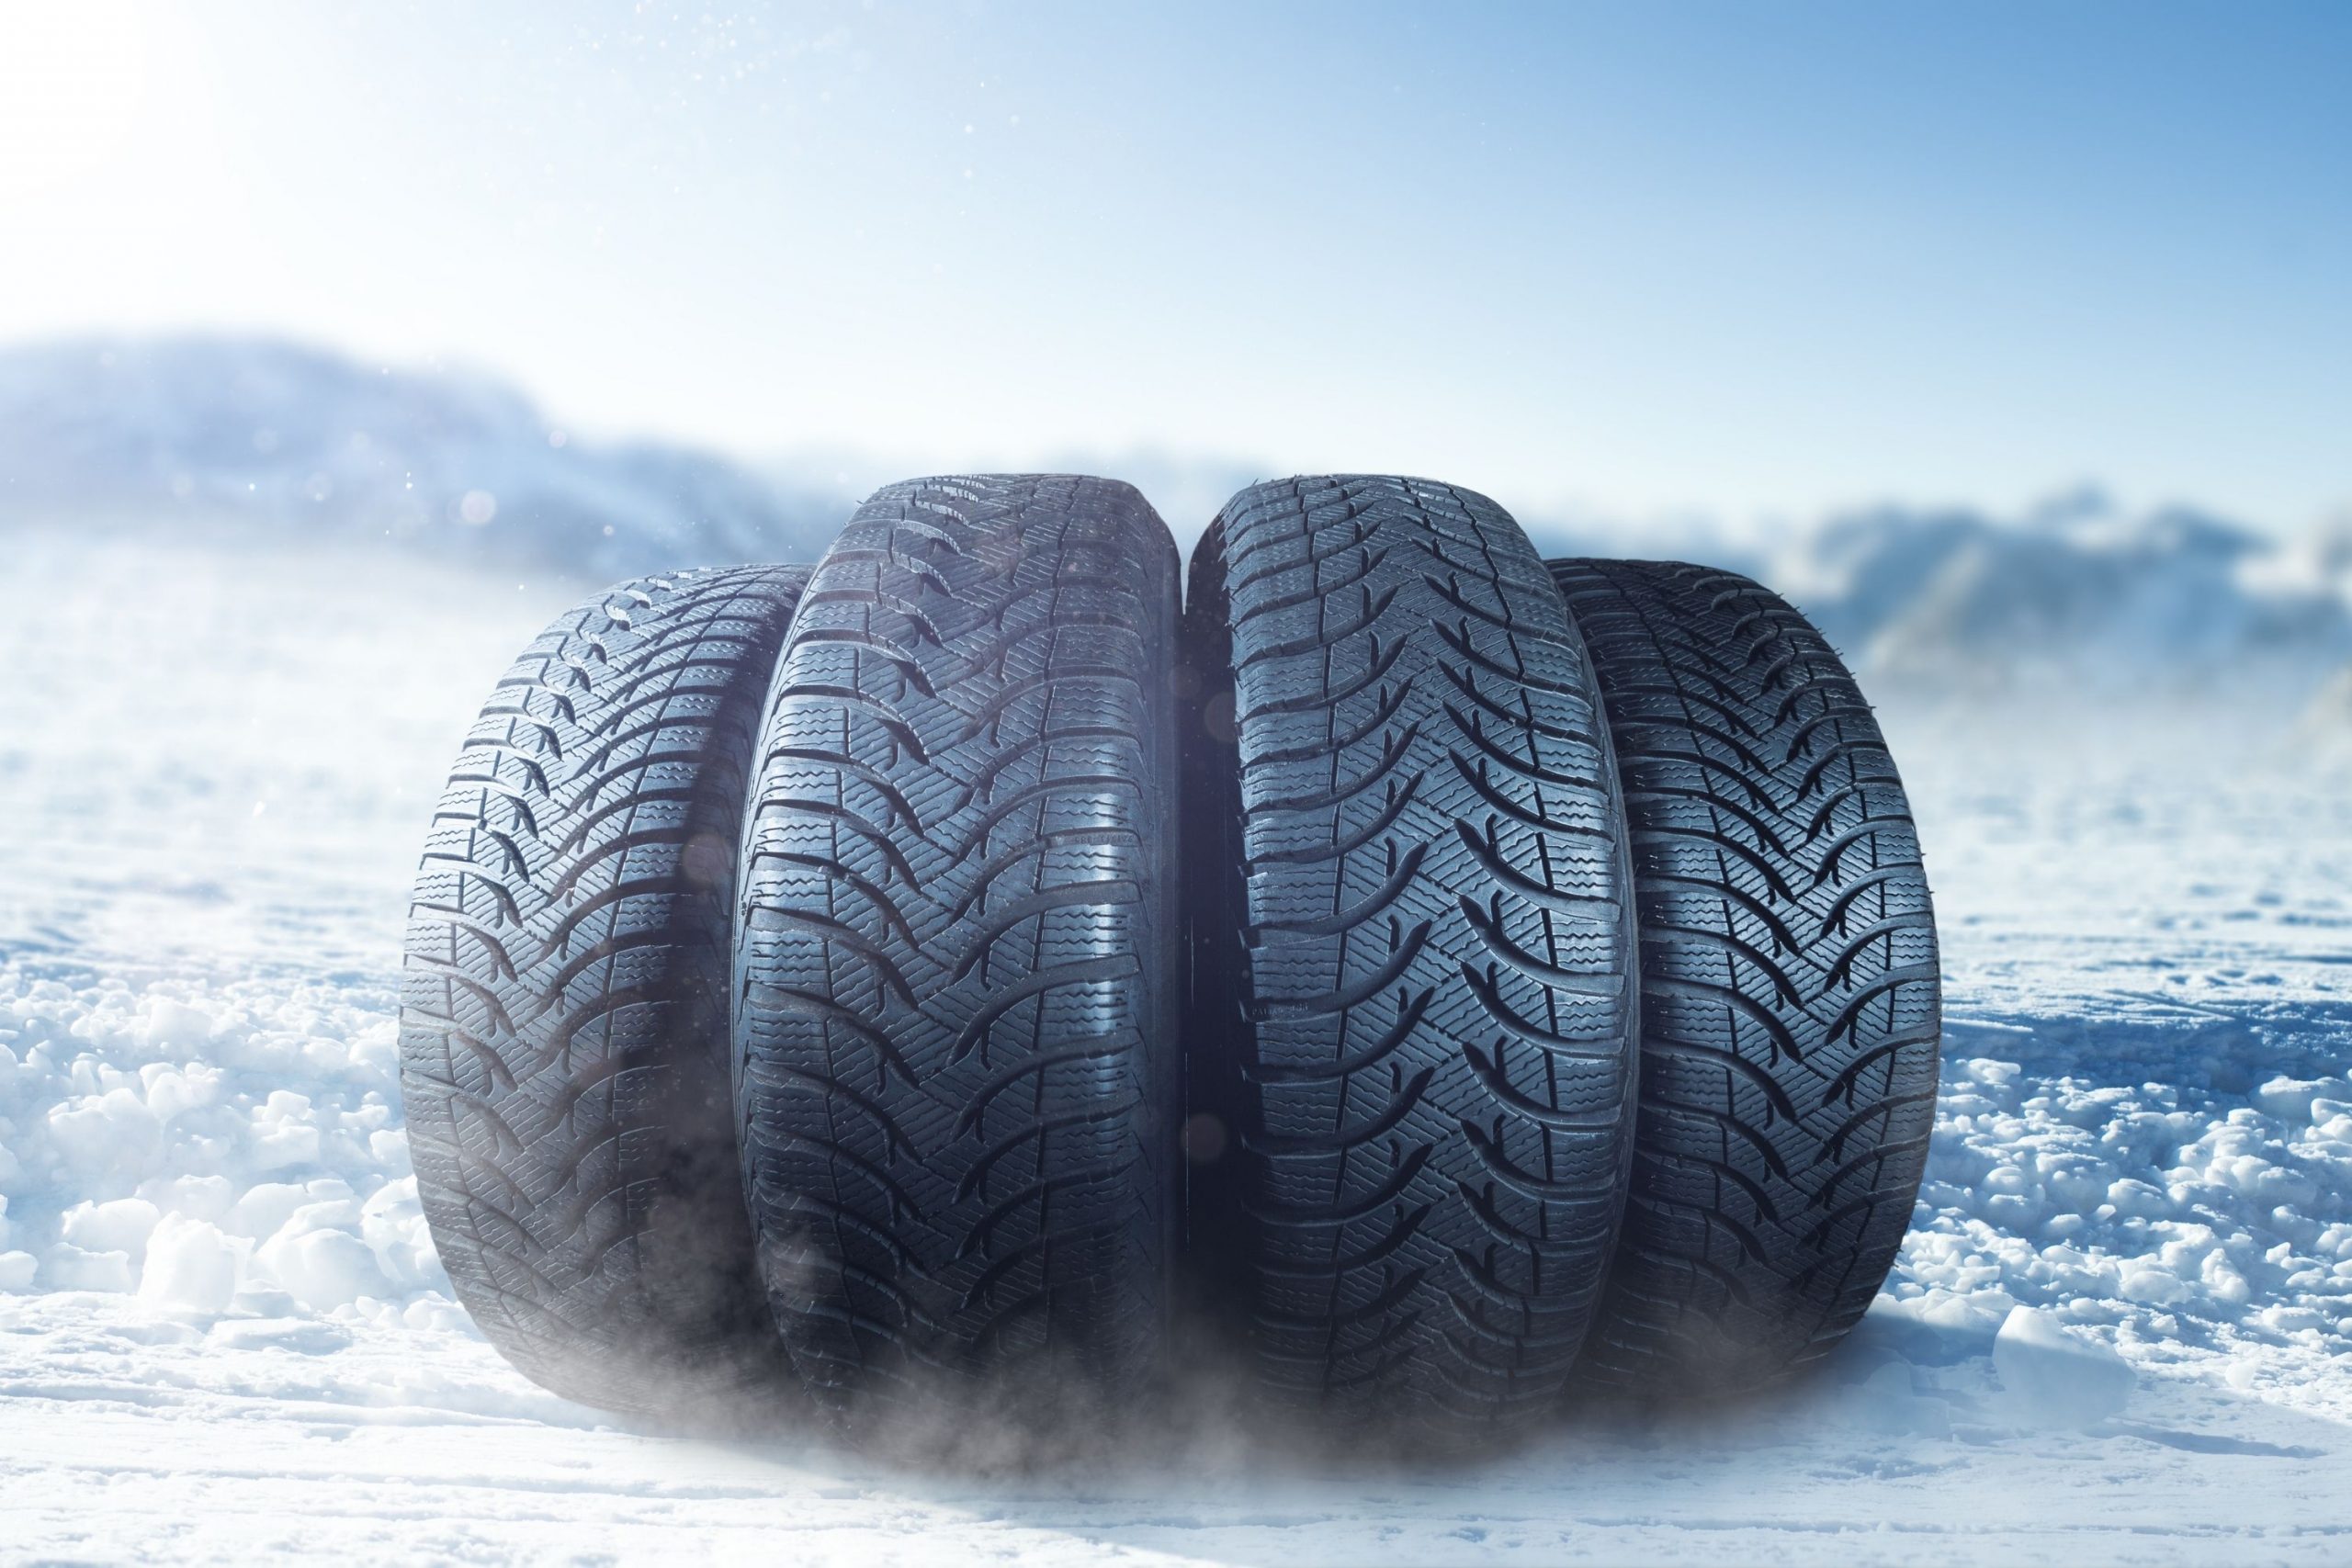 Make Sure Your Tires Are Safe